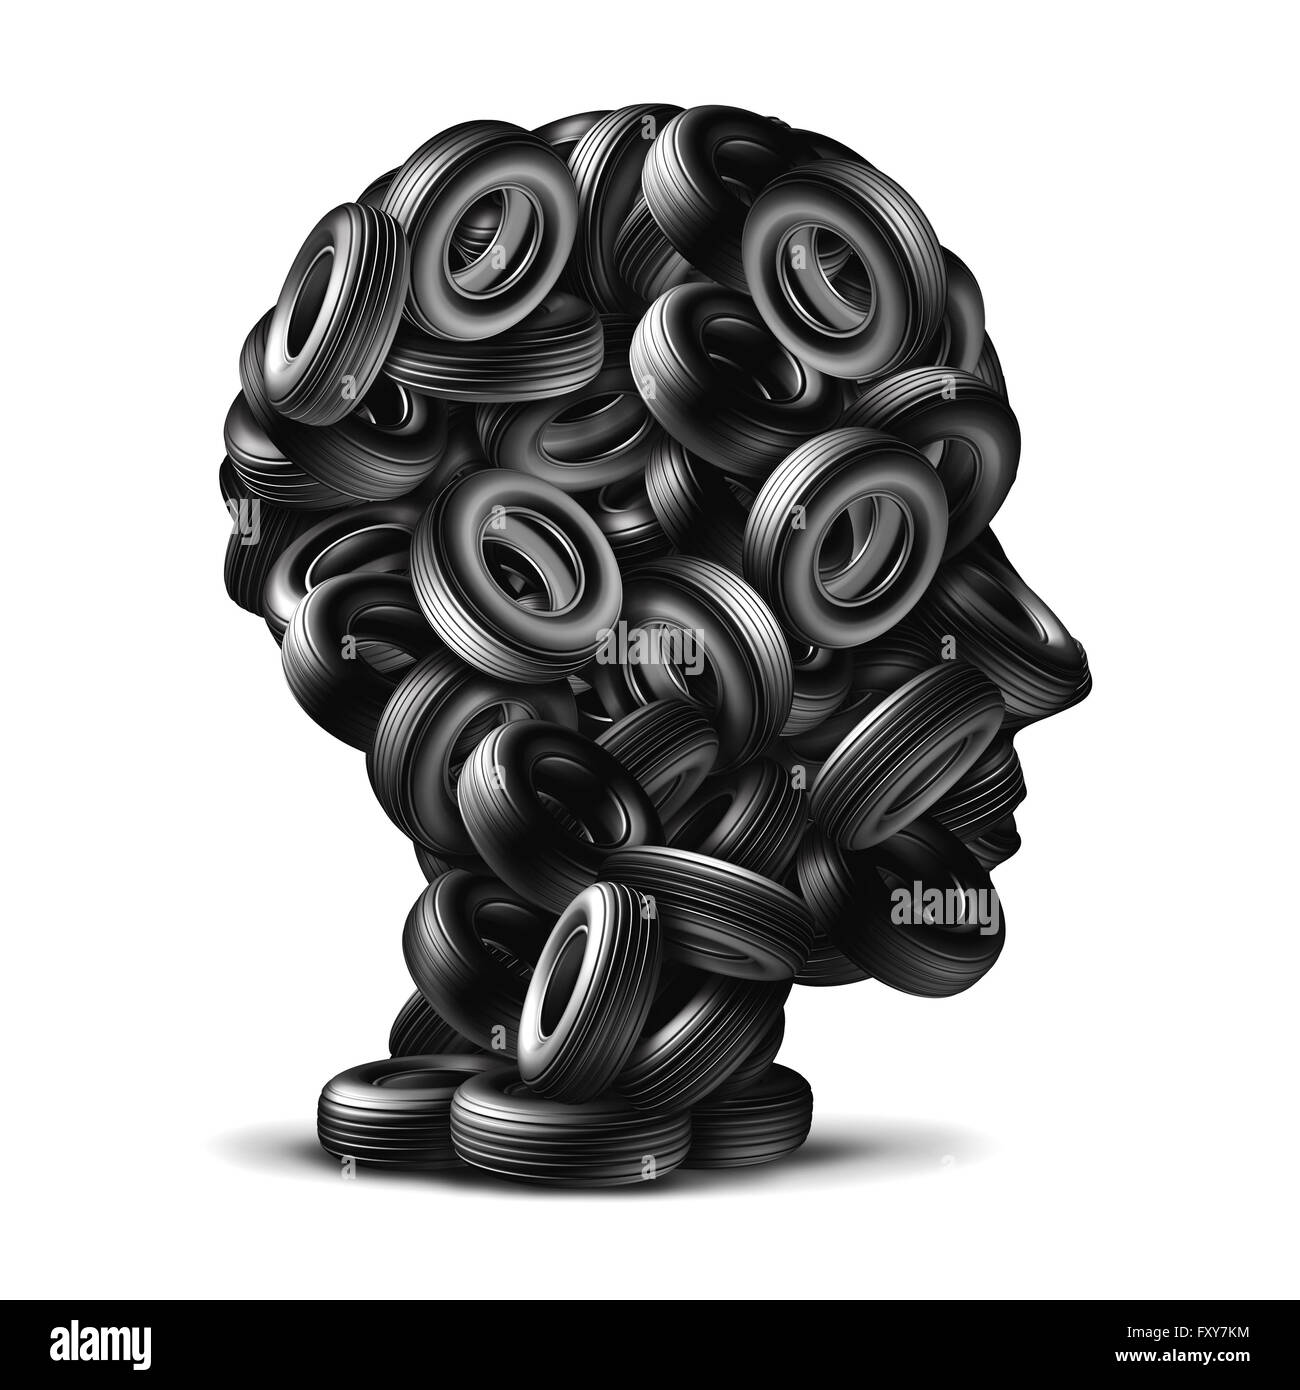 Car tire concept as a group of rubber wheels shaped as a human head as an auto mechanic repair symbol on a white background as a 3D illustration transportation icon. Stock Photo